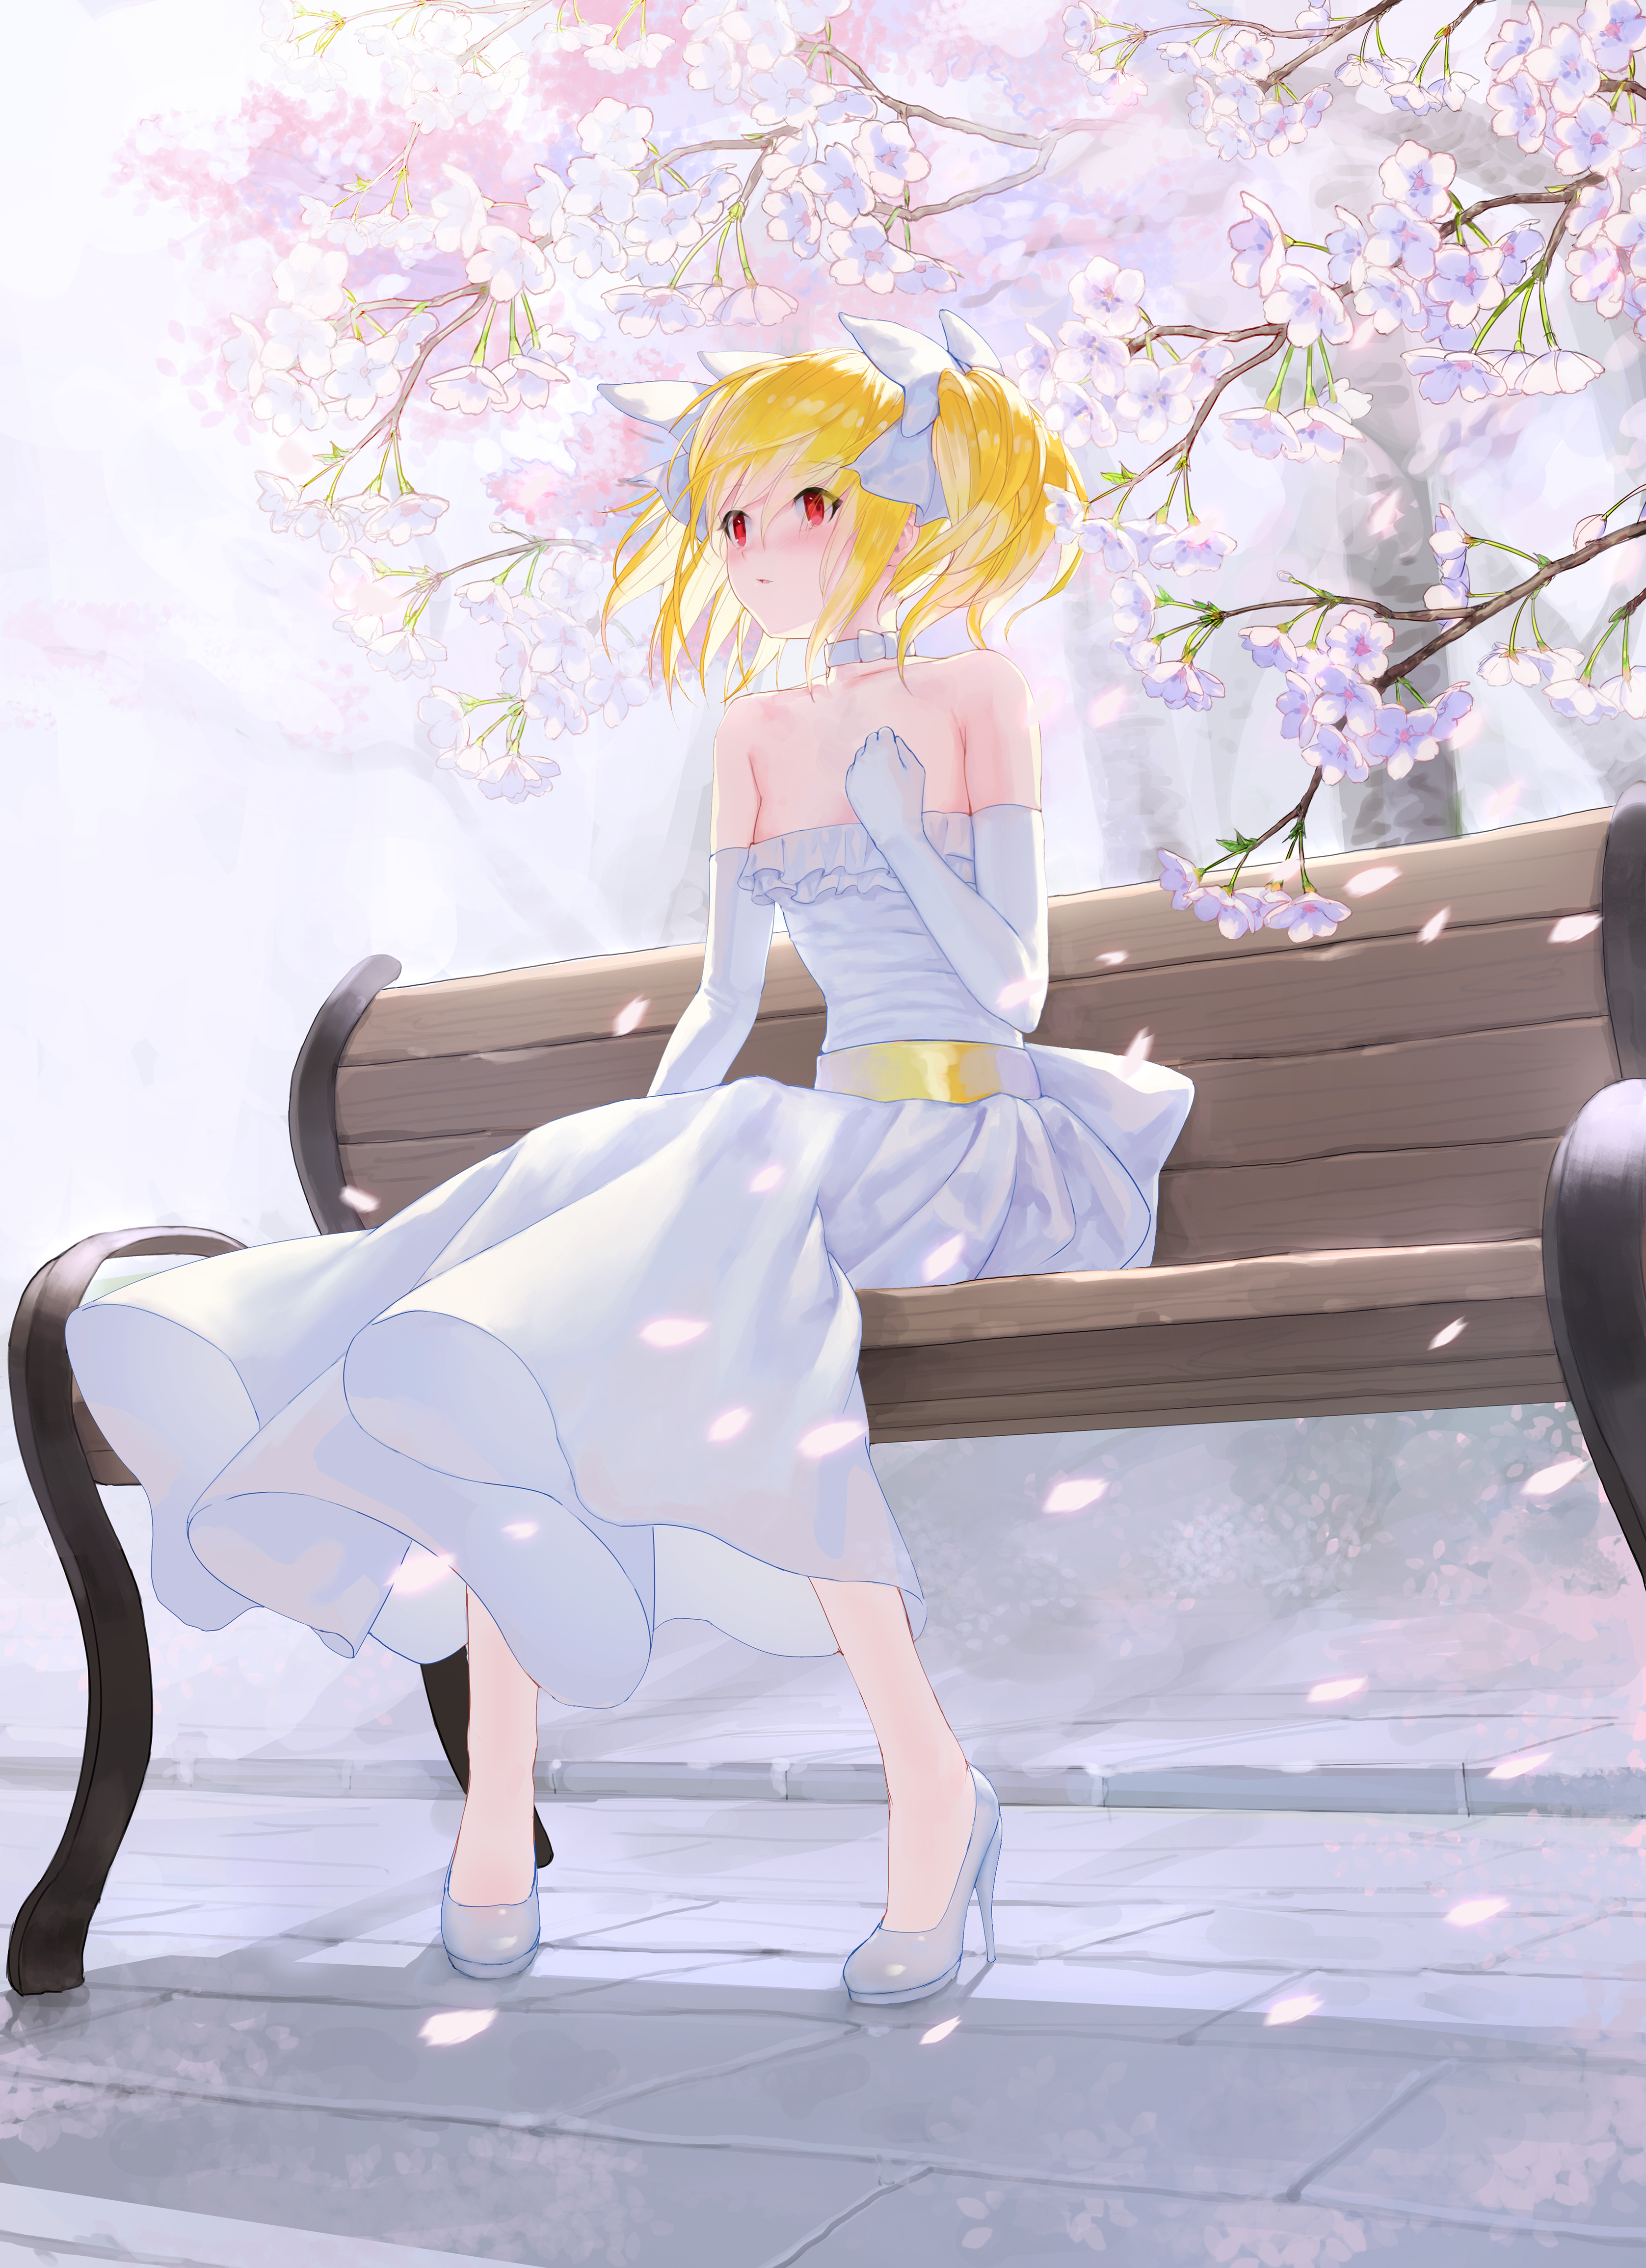 Dungeon And Fighter Dress White Dress Cherry Blossom Anime 3354x4622